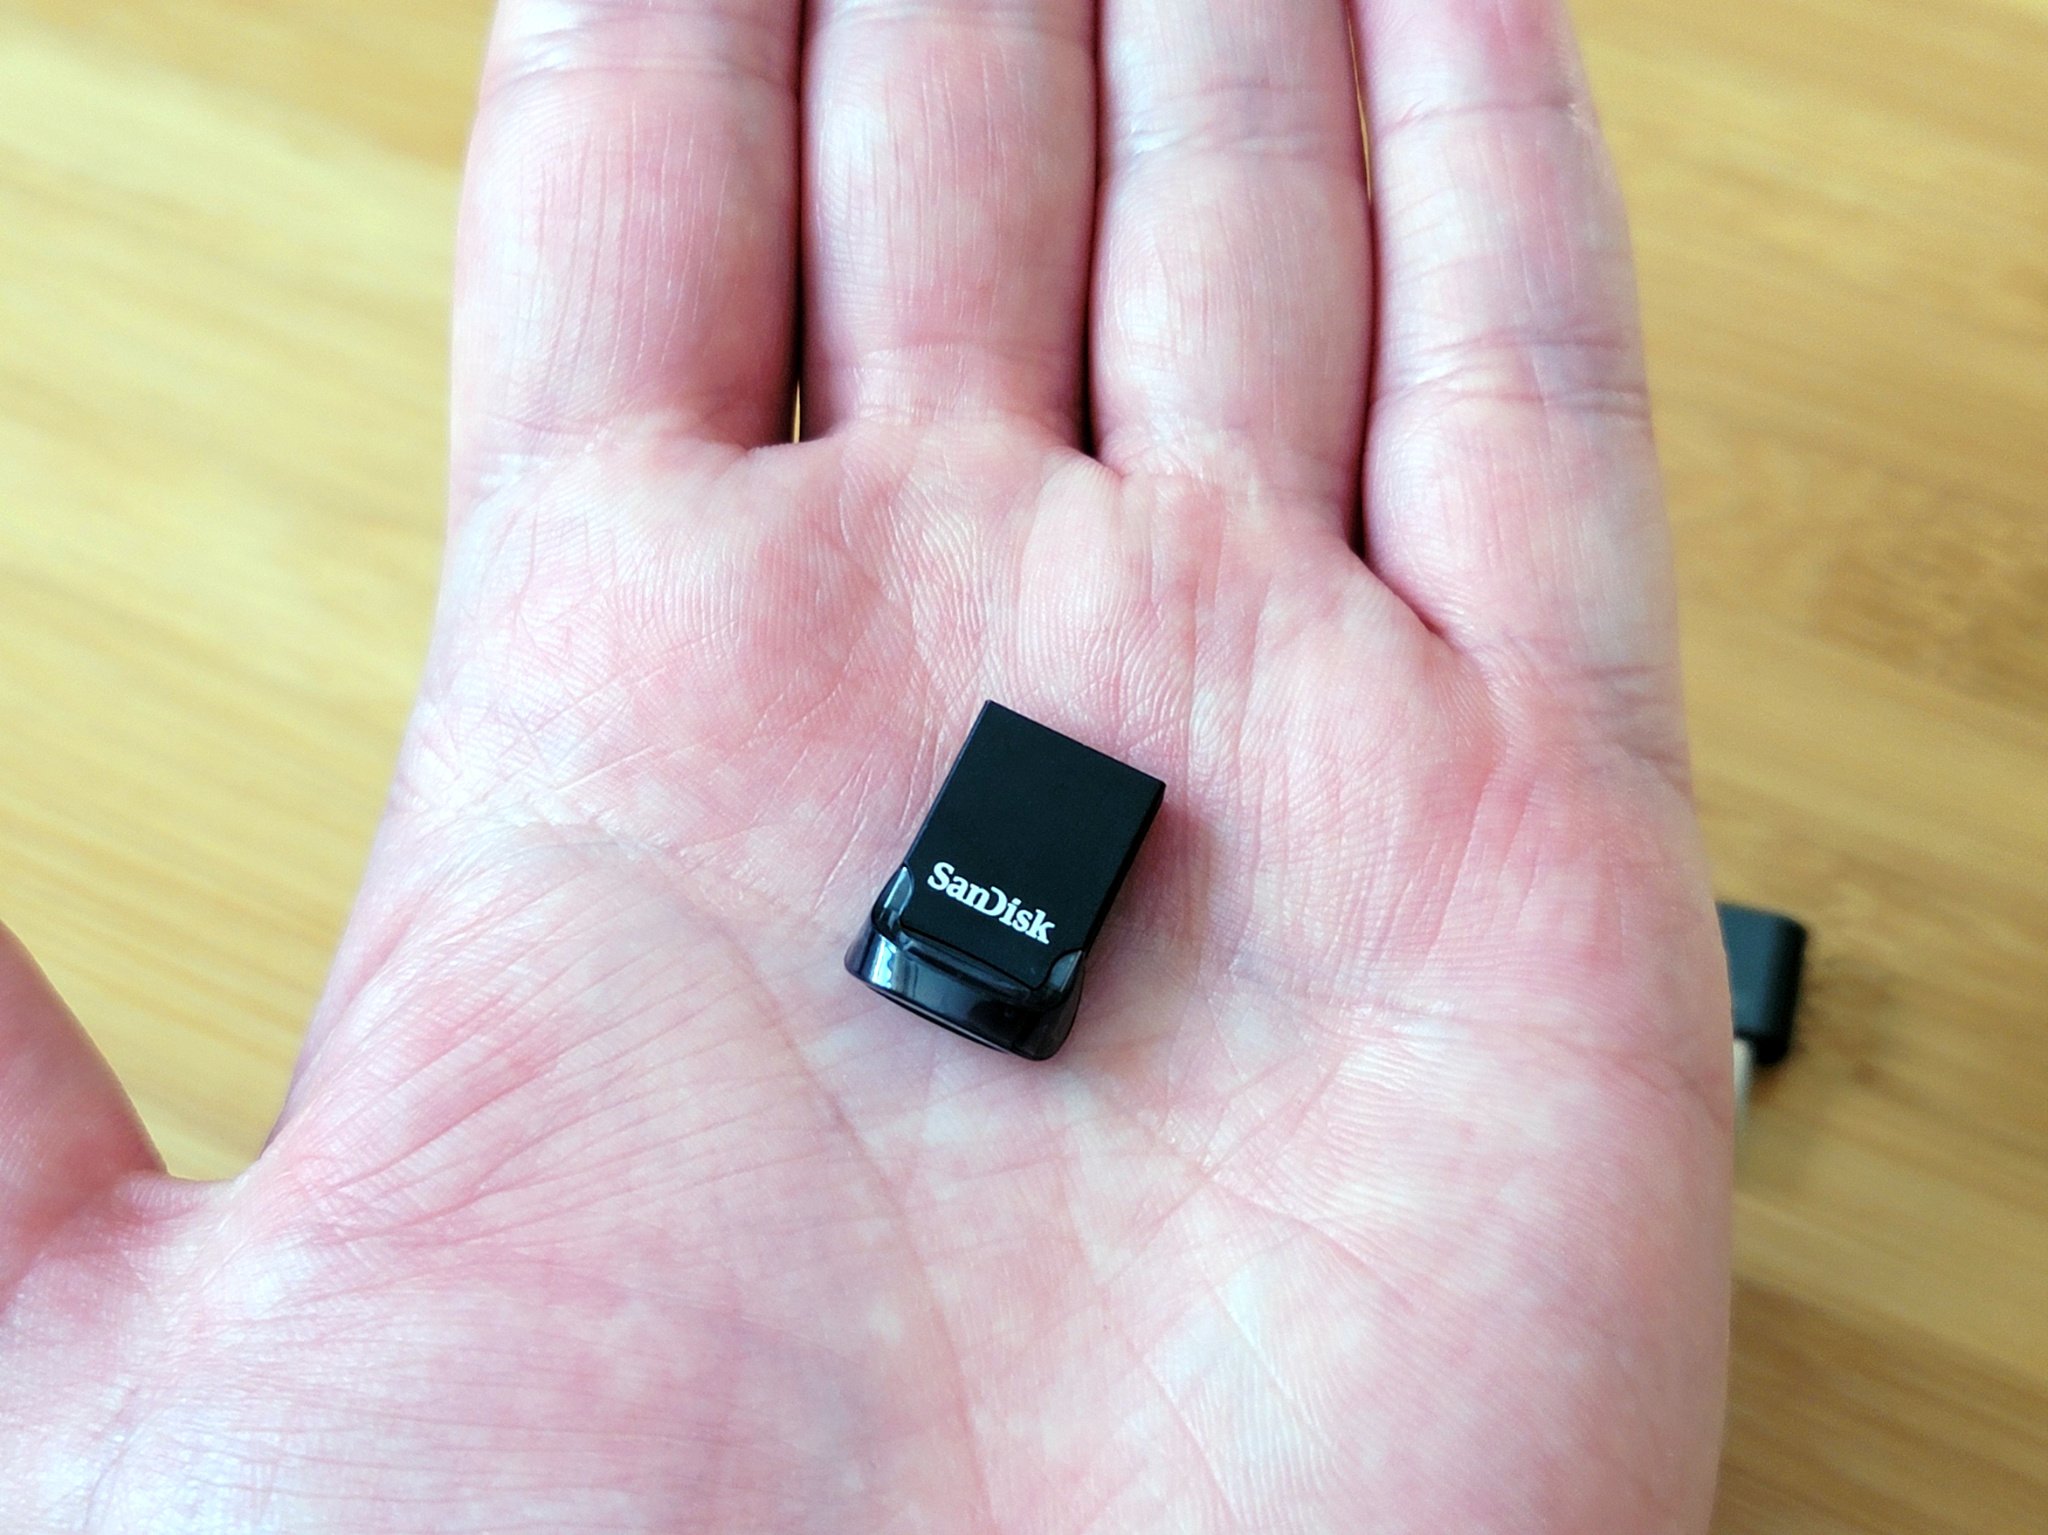 SanDisk Ultra A simple flash drive that blends right in | Windows